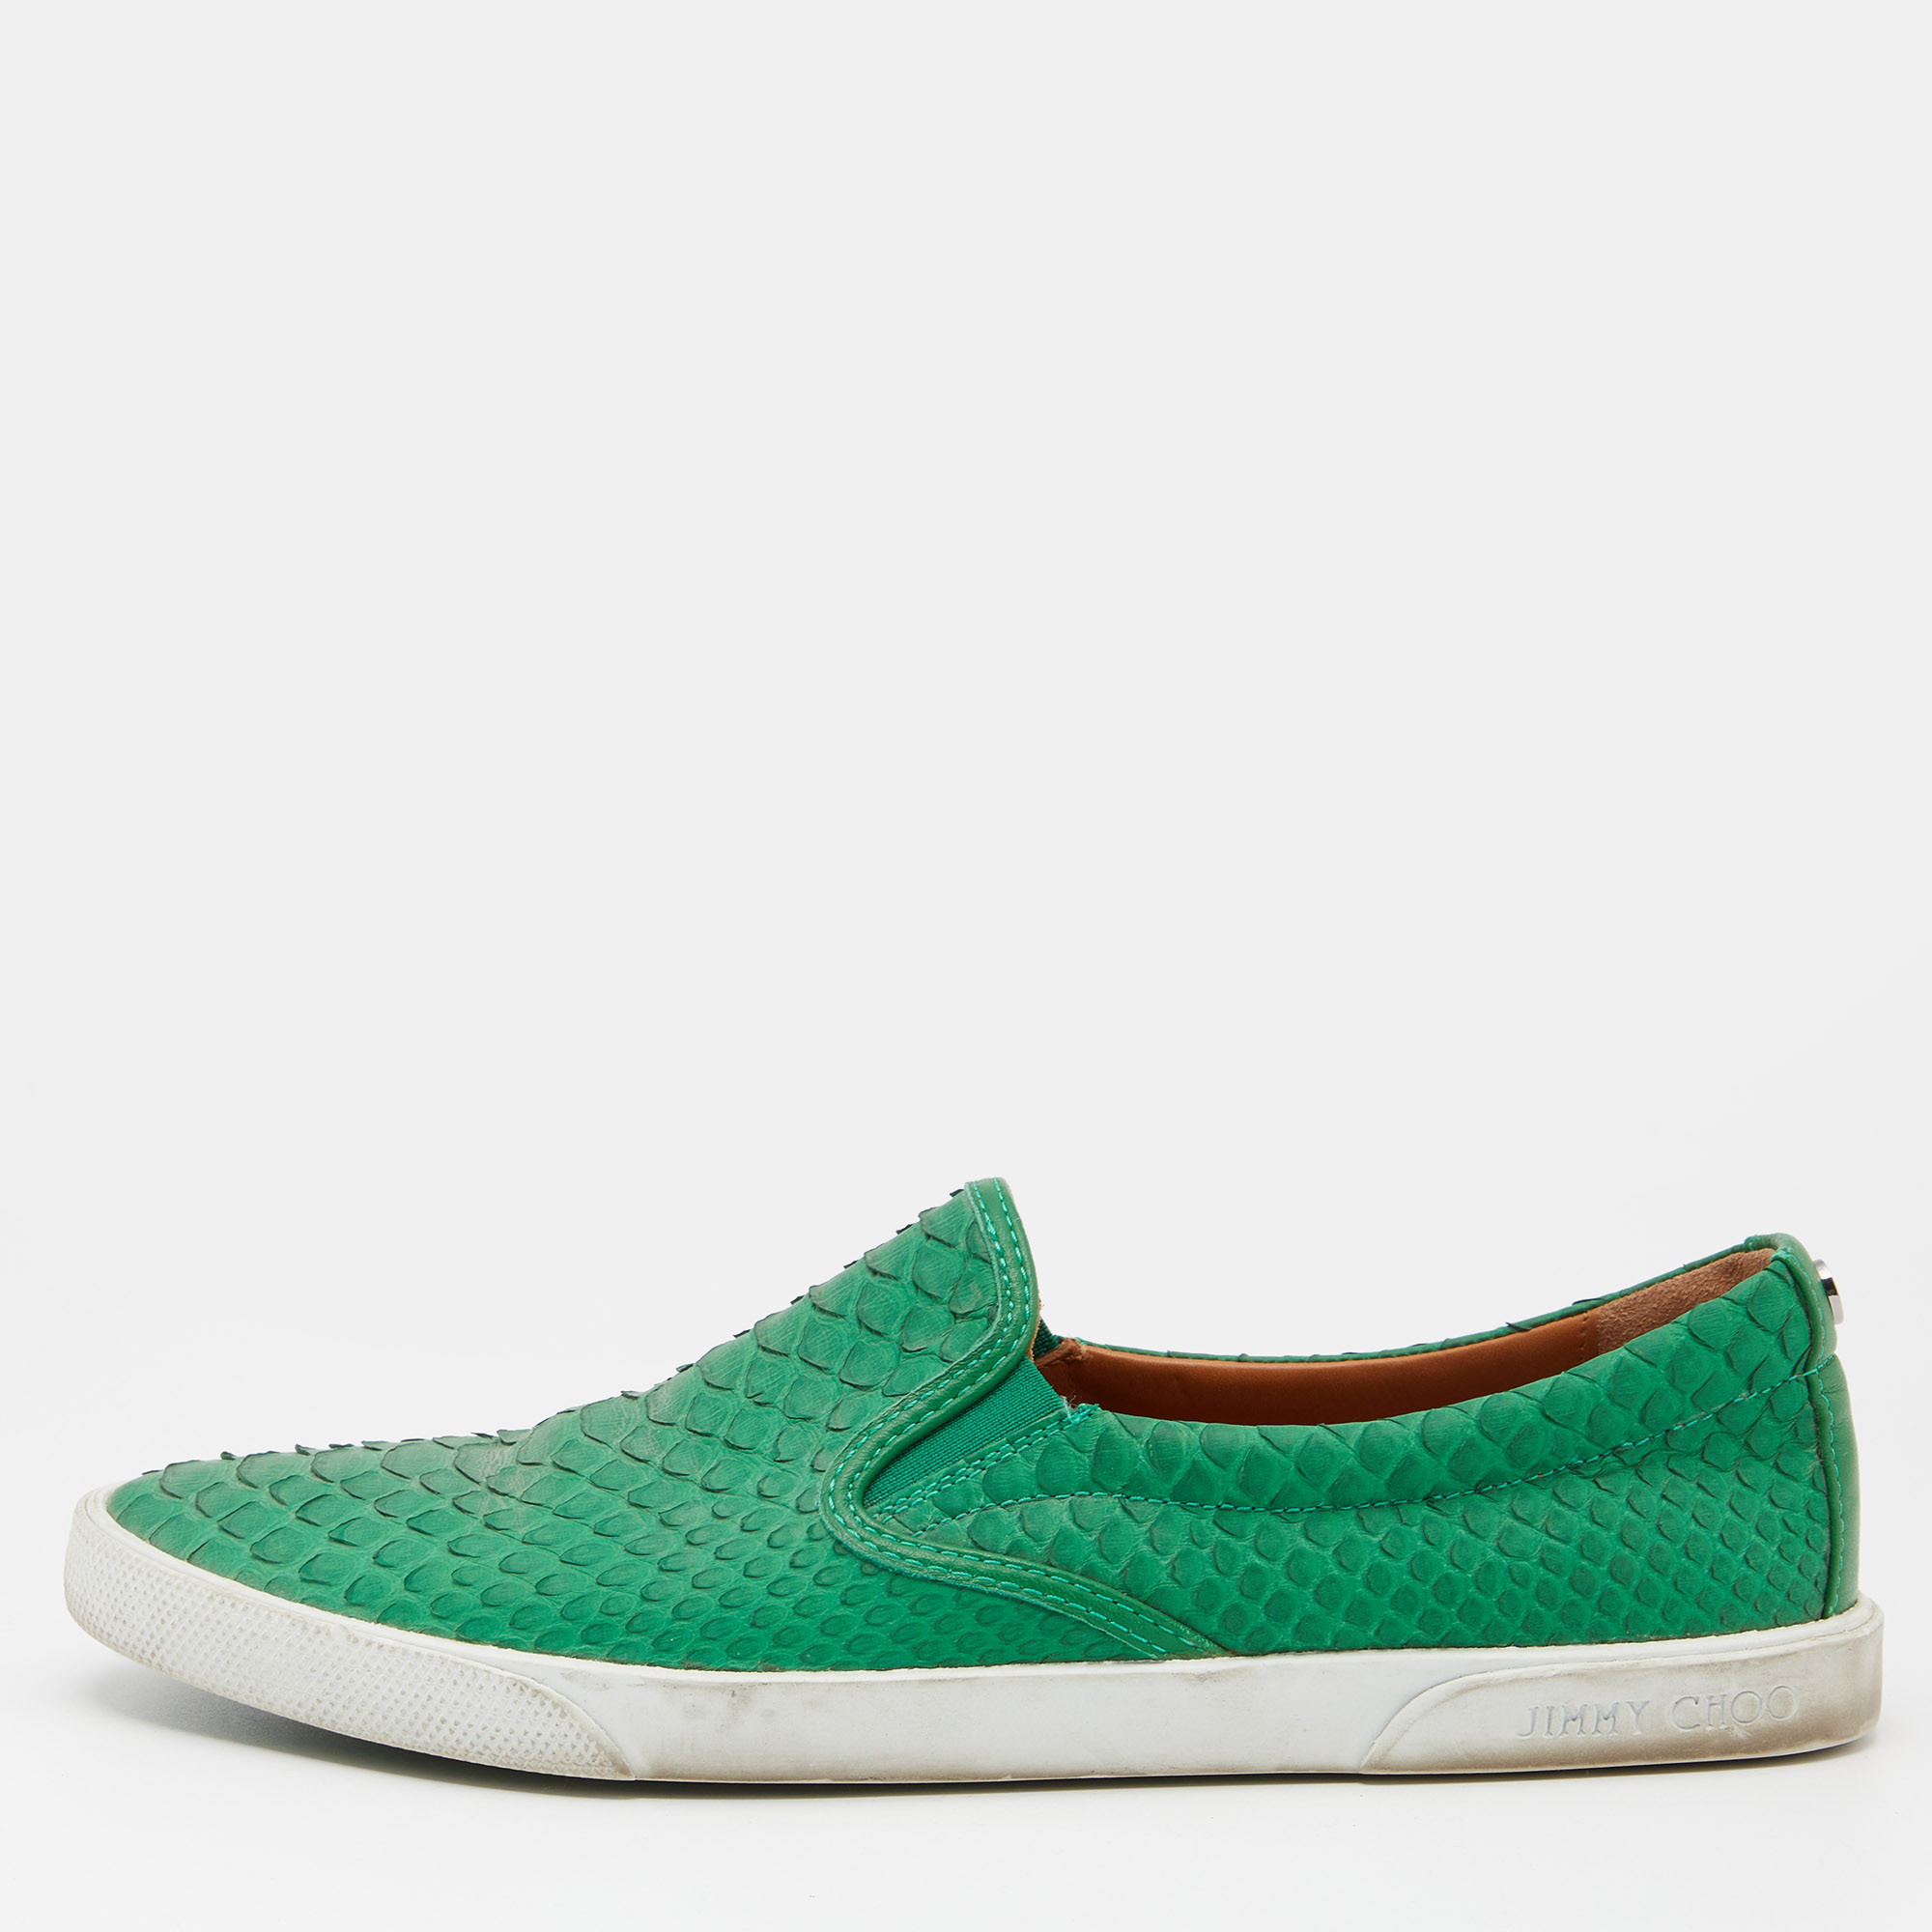 Pre-owned Jimmy Choo Green Python Slip On Trainers Size 38.5